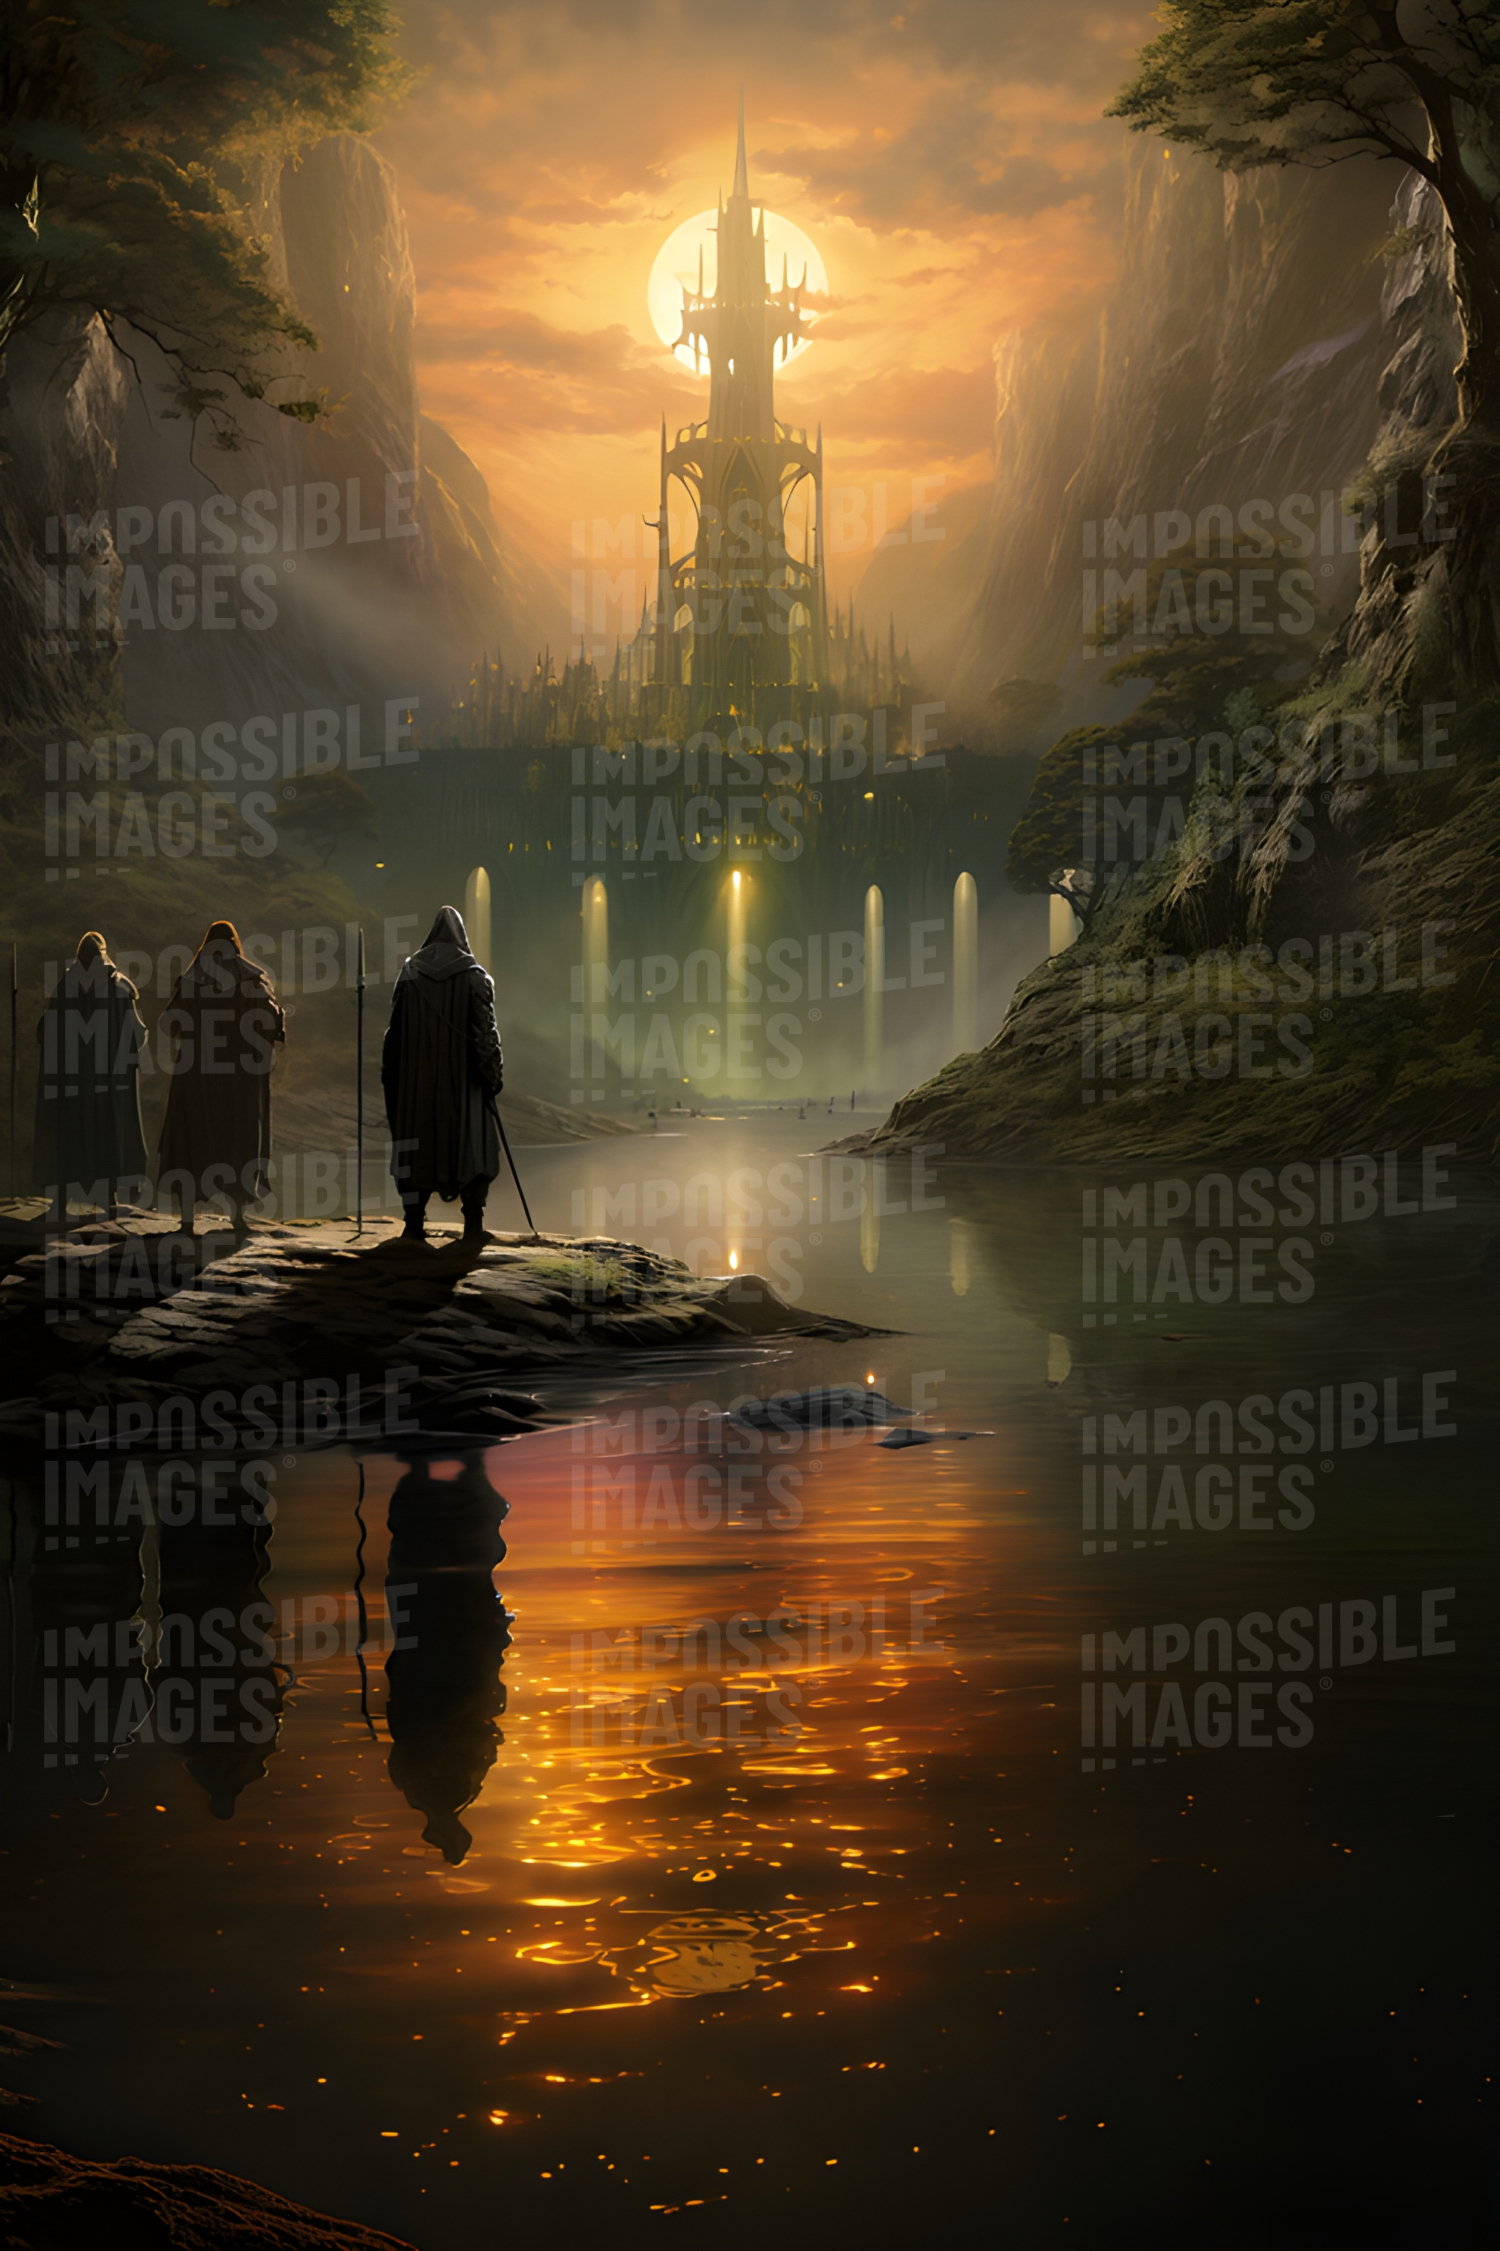 Fantasy concept art painting depicting three cloaked travellers looking at an amazing alien building facing them across a lake against a dramatic sunset